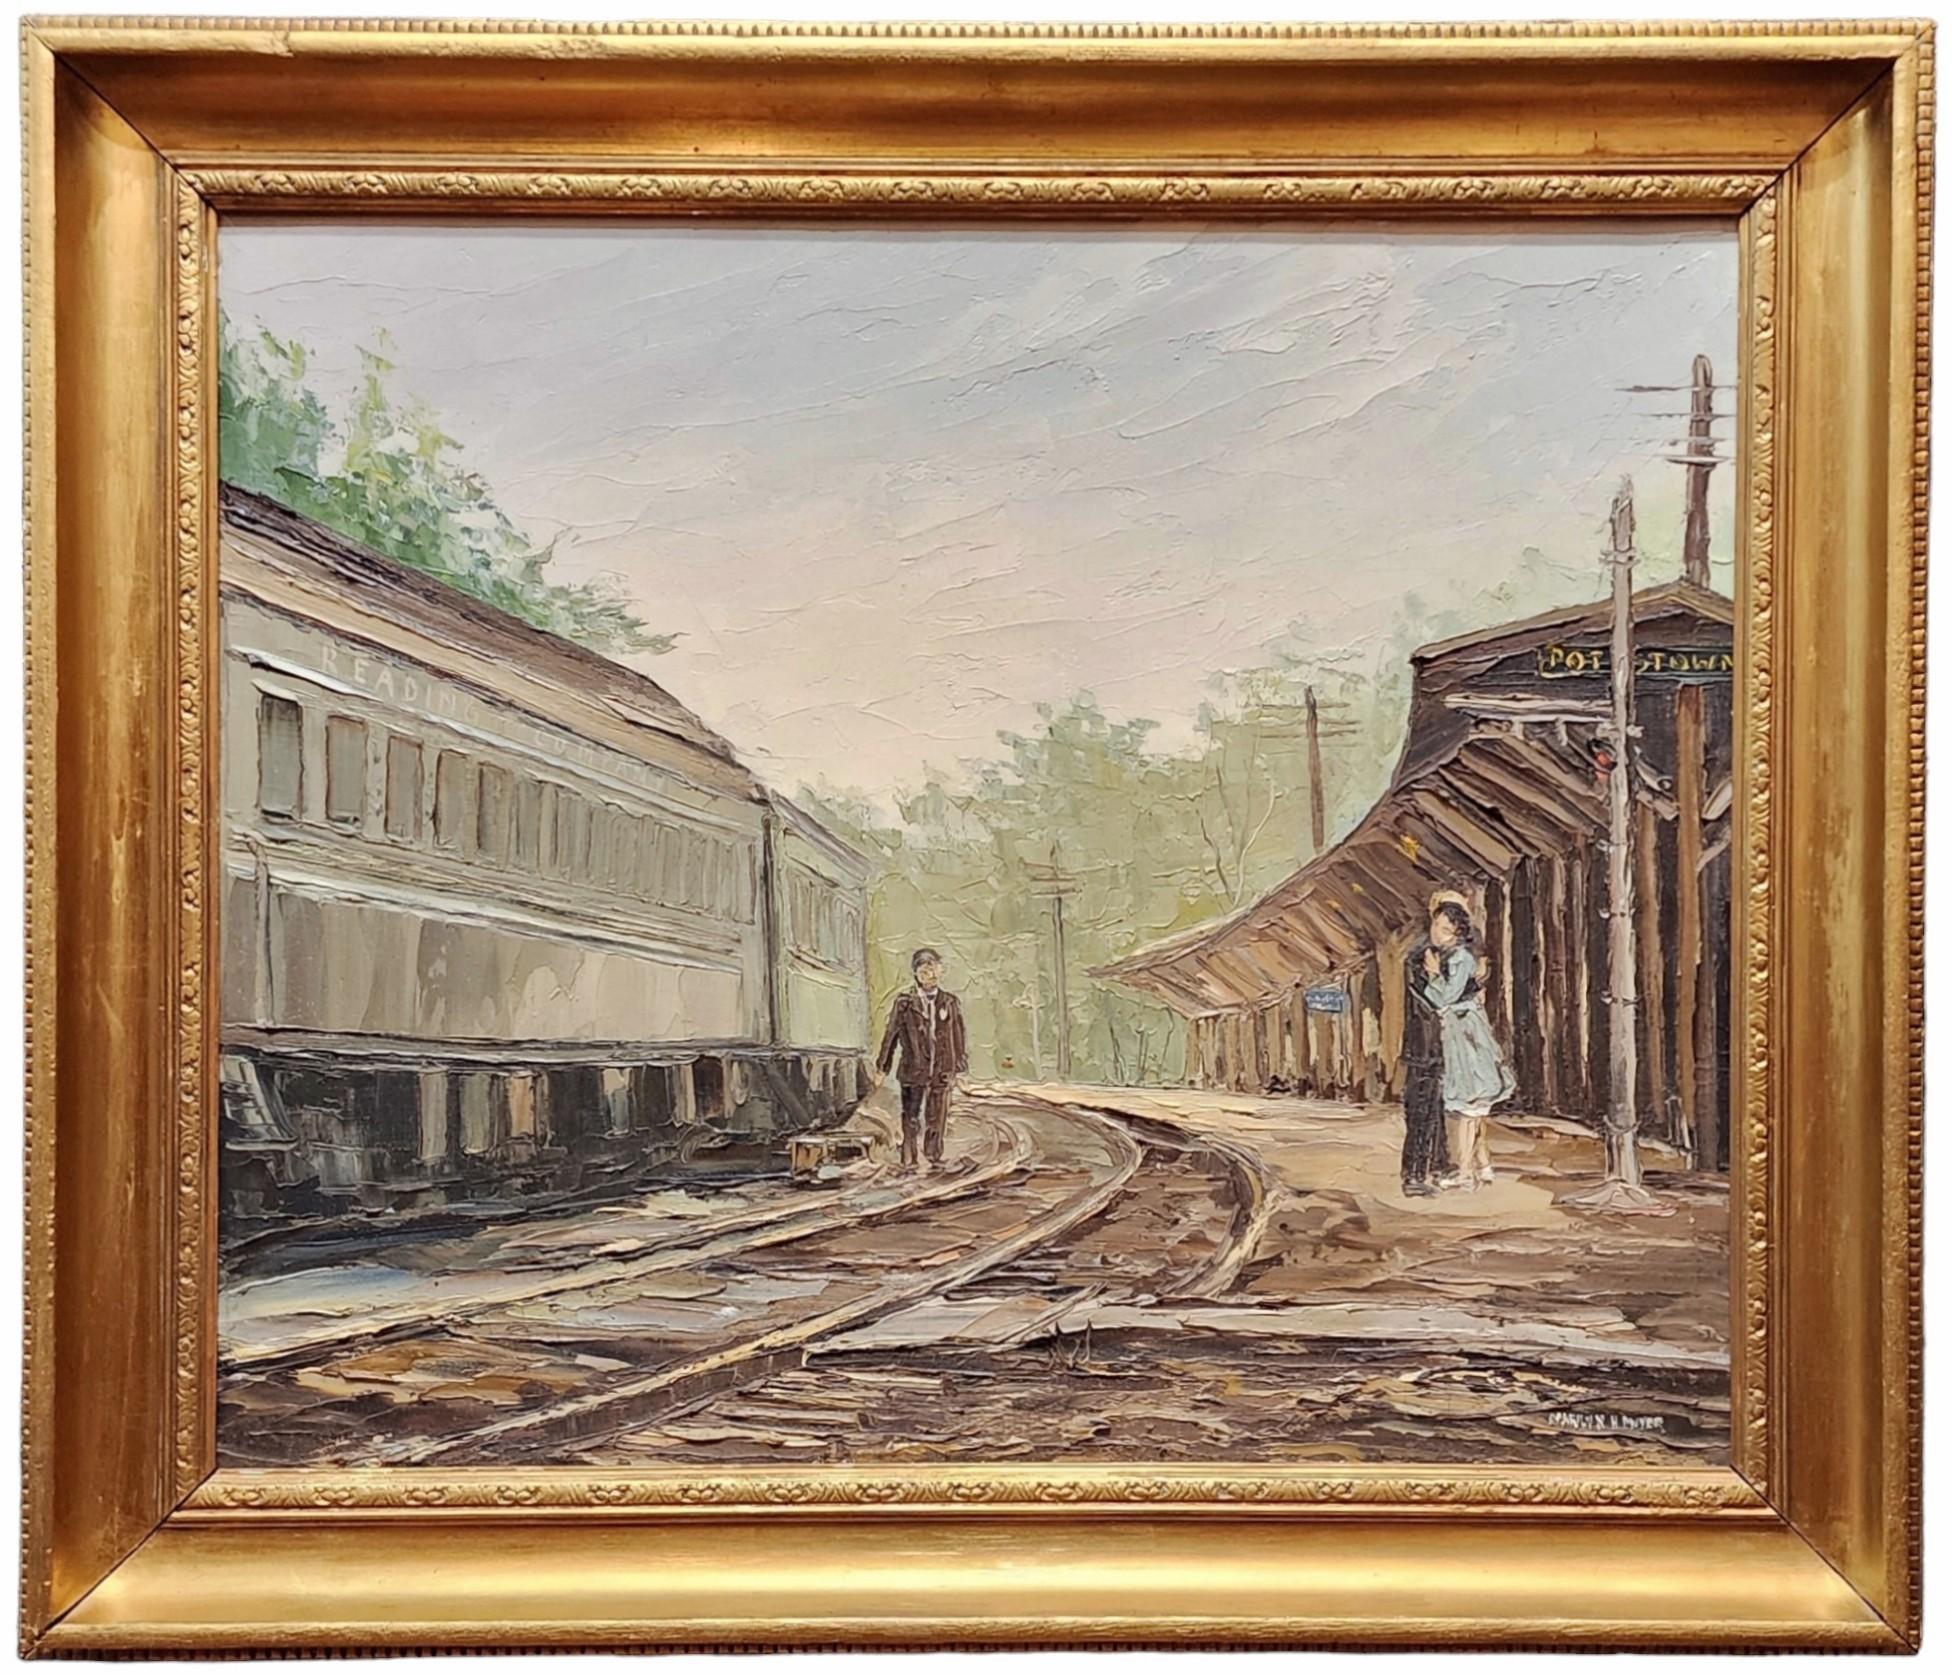 Marilyn H. Dwyer Landscape Painting - Until Next Time, Pottstown, Pennsylvania Train Station, Lovers Say Goodbye